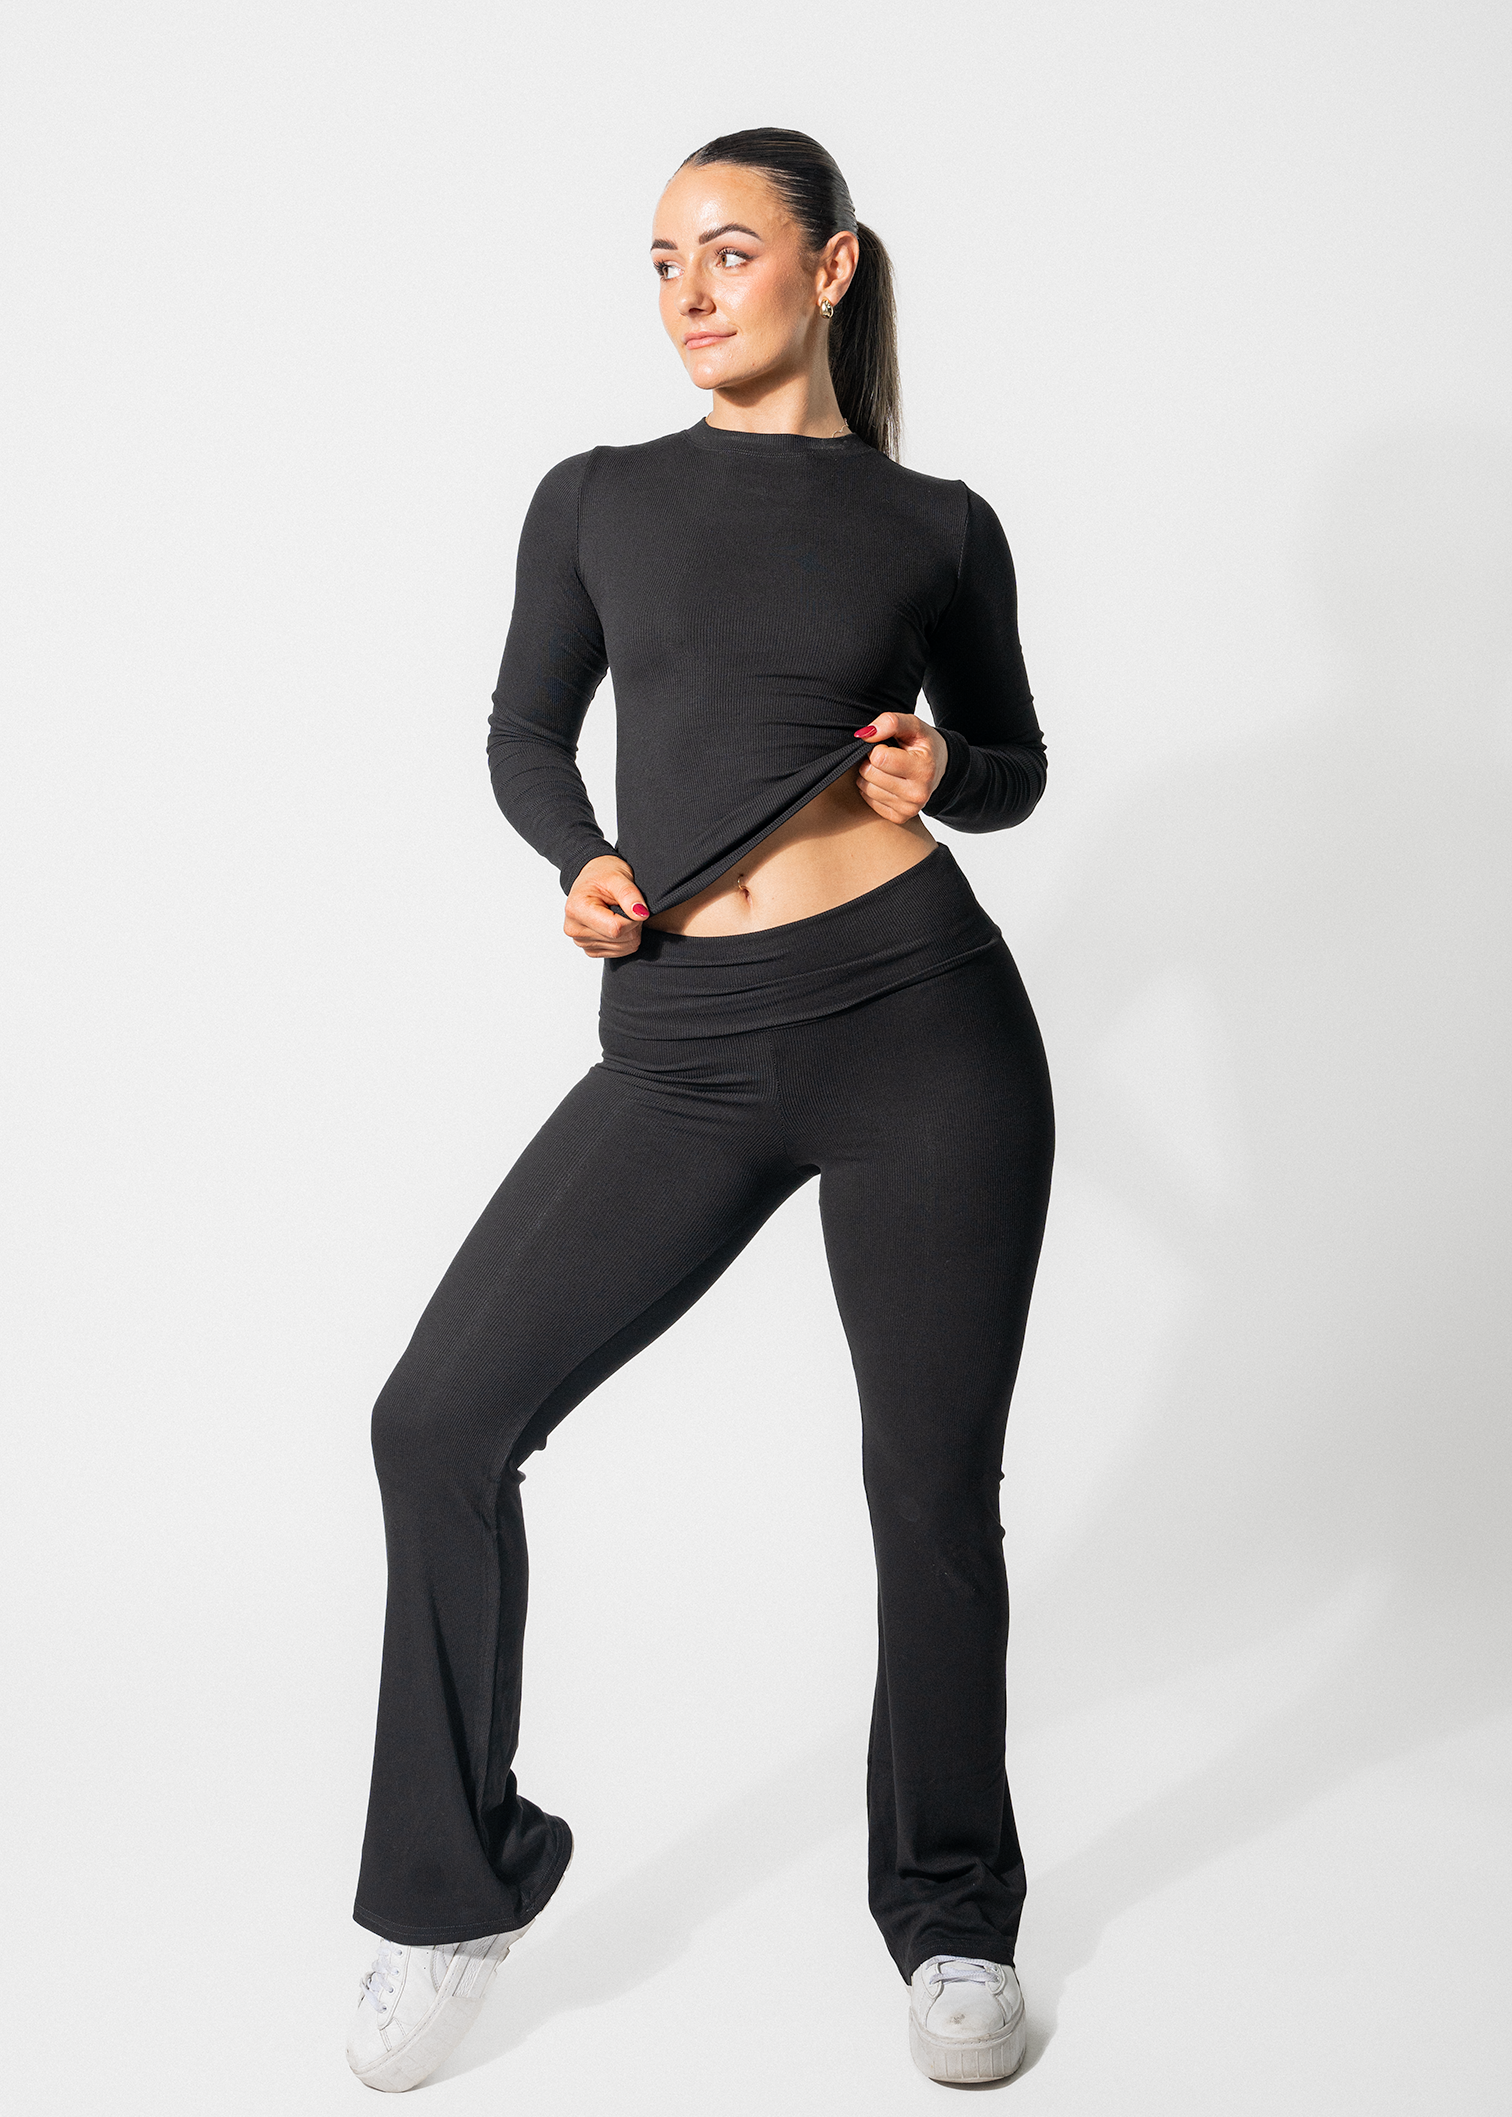 FITTED LOUNGE LONG SLEEVE - BLACK